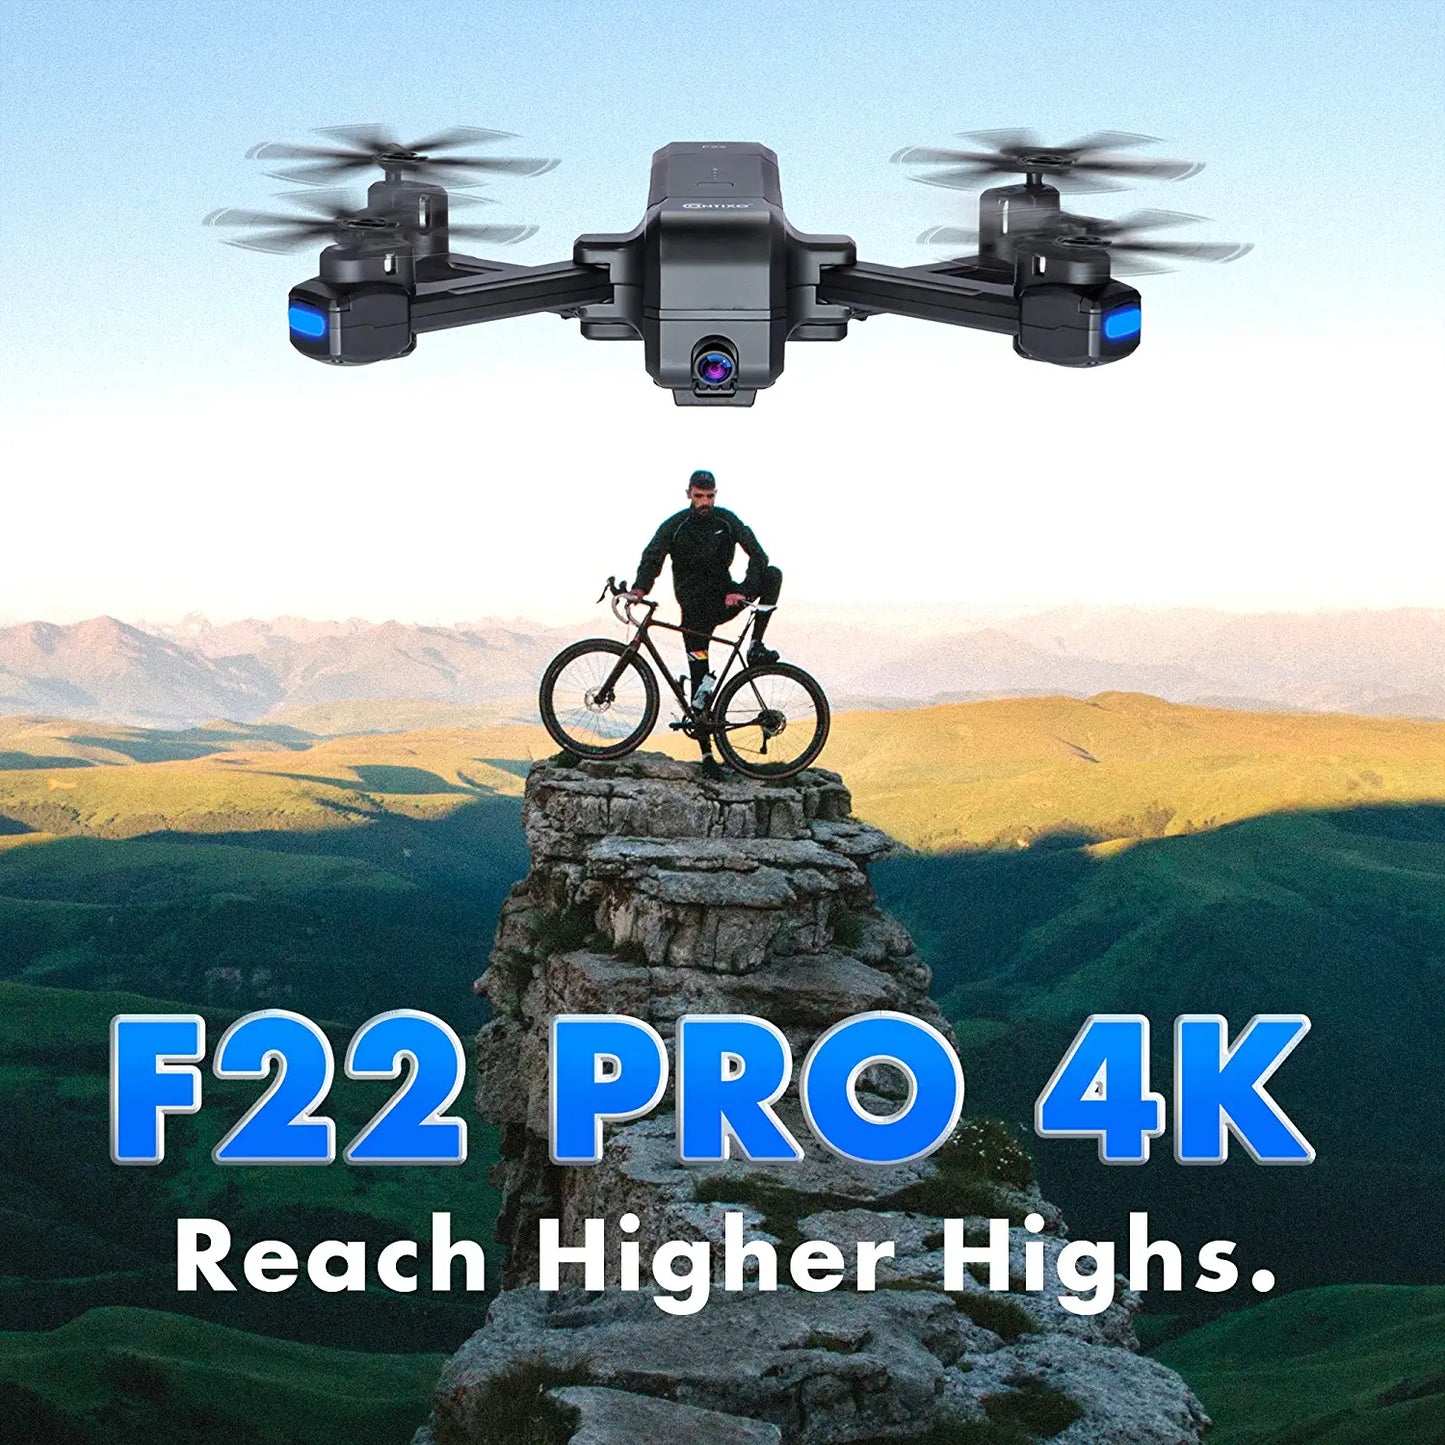 Contixo F22 FPV Drone - with Camera for Adults, Kids, Beginners - 2.4G RC Quadcopter with 4K HD FHD Camera - Gesture Control, Custom Flight Path, WiFi, GPS Auto Hover Return Home, Follow Me, Carrying Case Professional Camera Drone - RCDrone